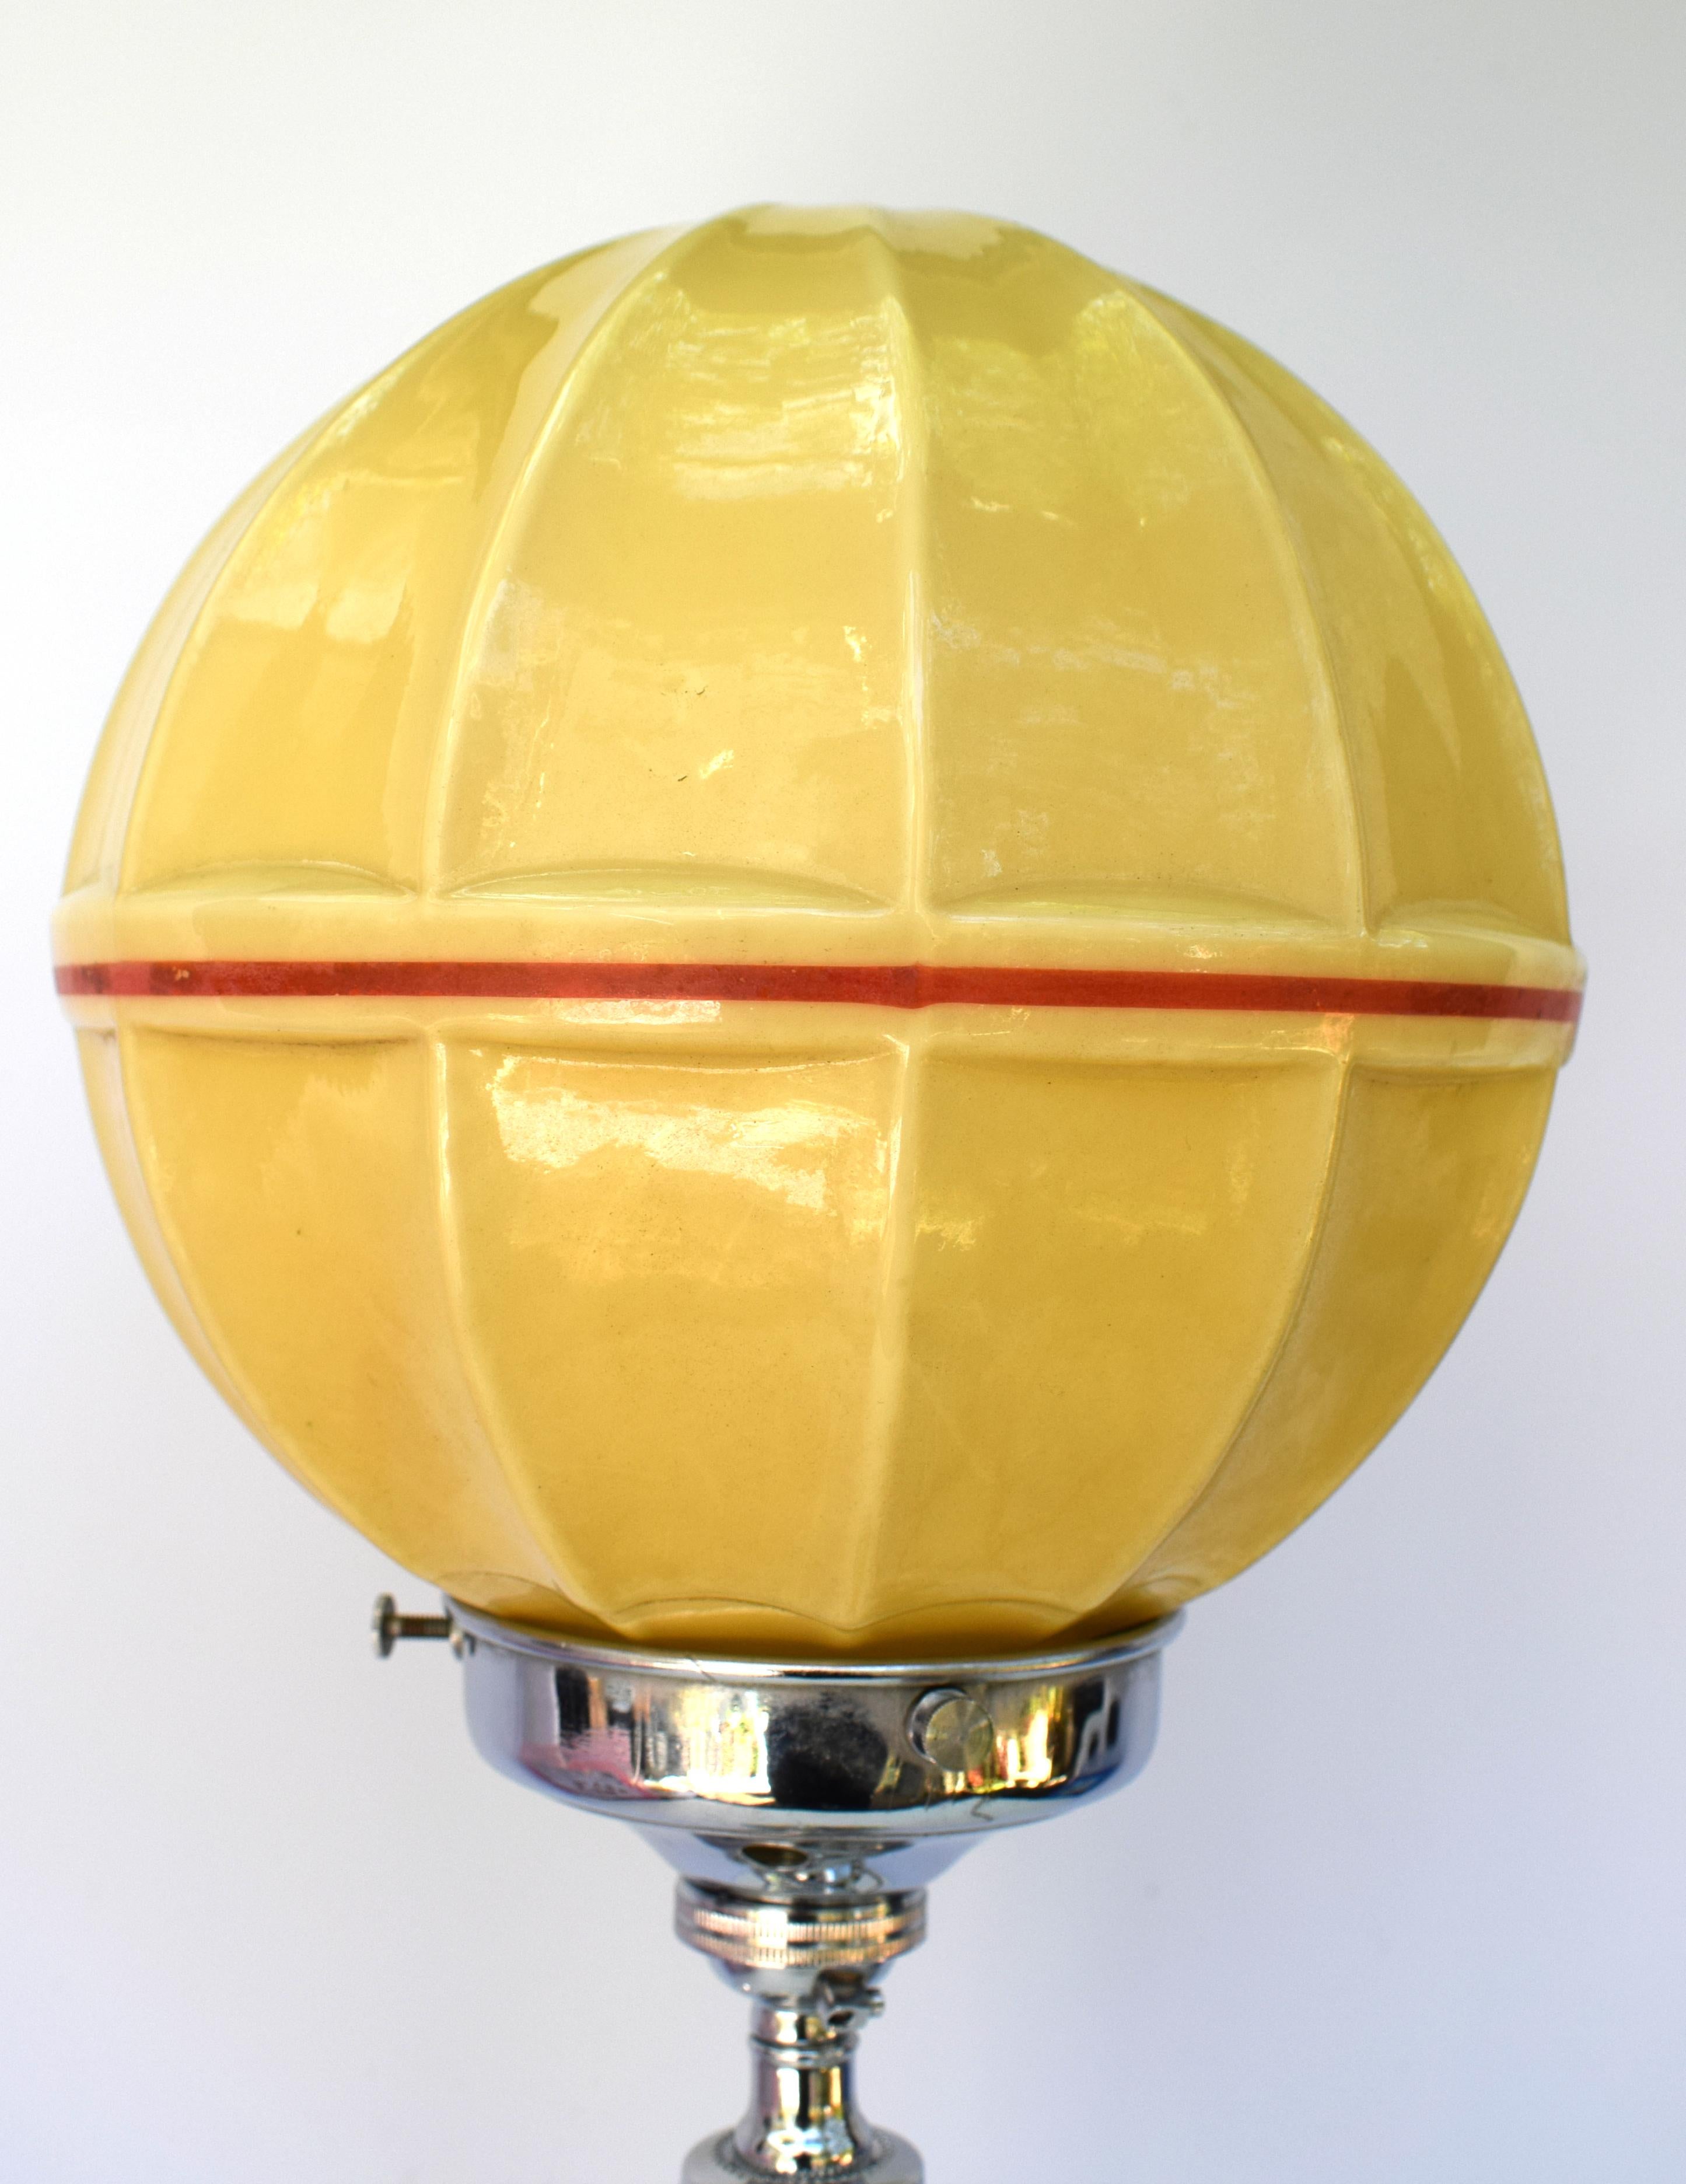 Art Deco 1930s Bakelite and Chrome Table Lamp In Good Condition For Sale In Devon, England